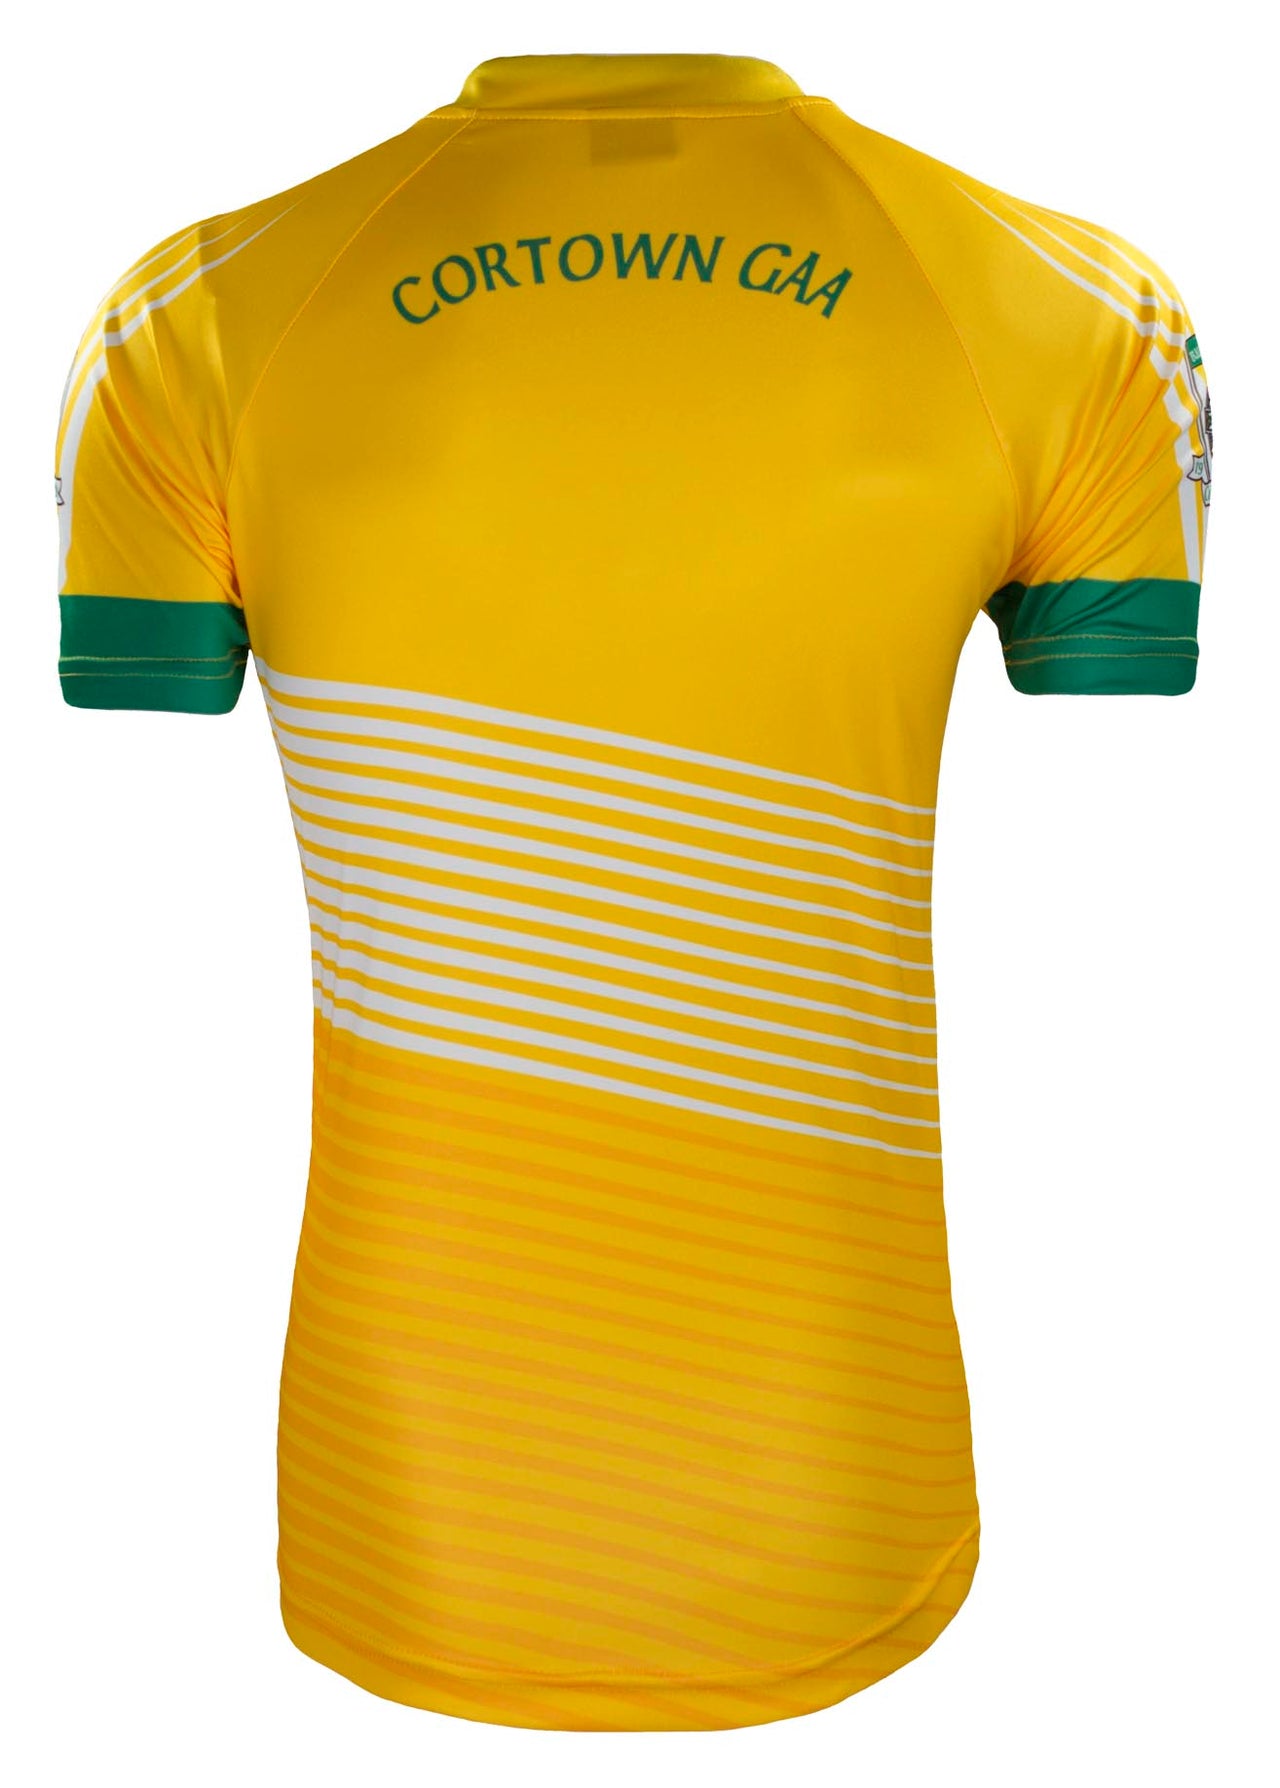 Cortown GFC Home Jersey Regular Fit Adult